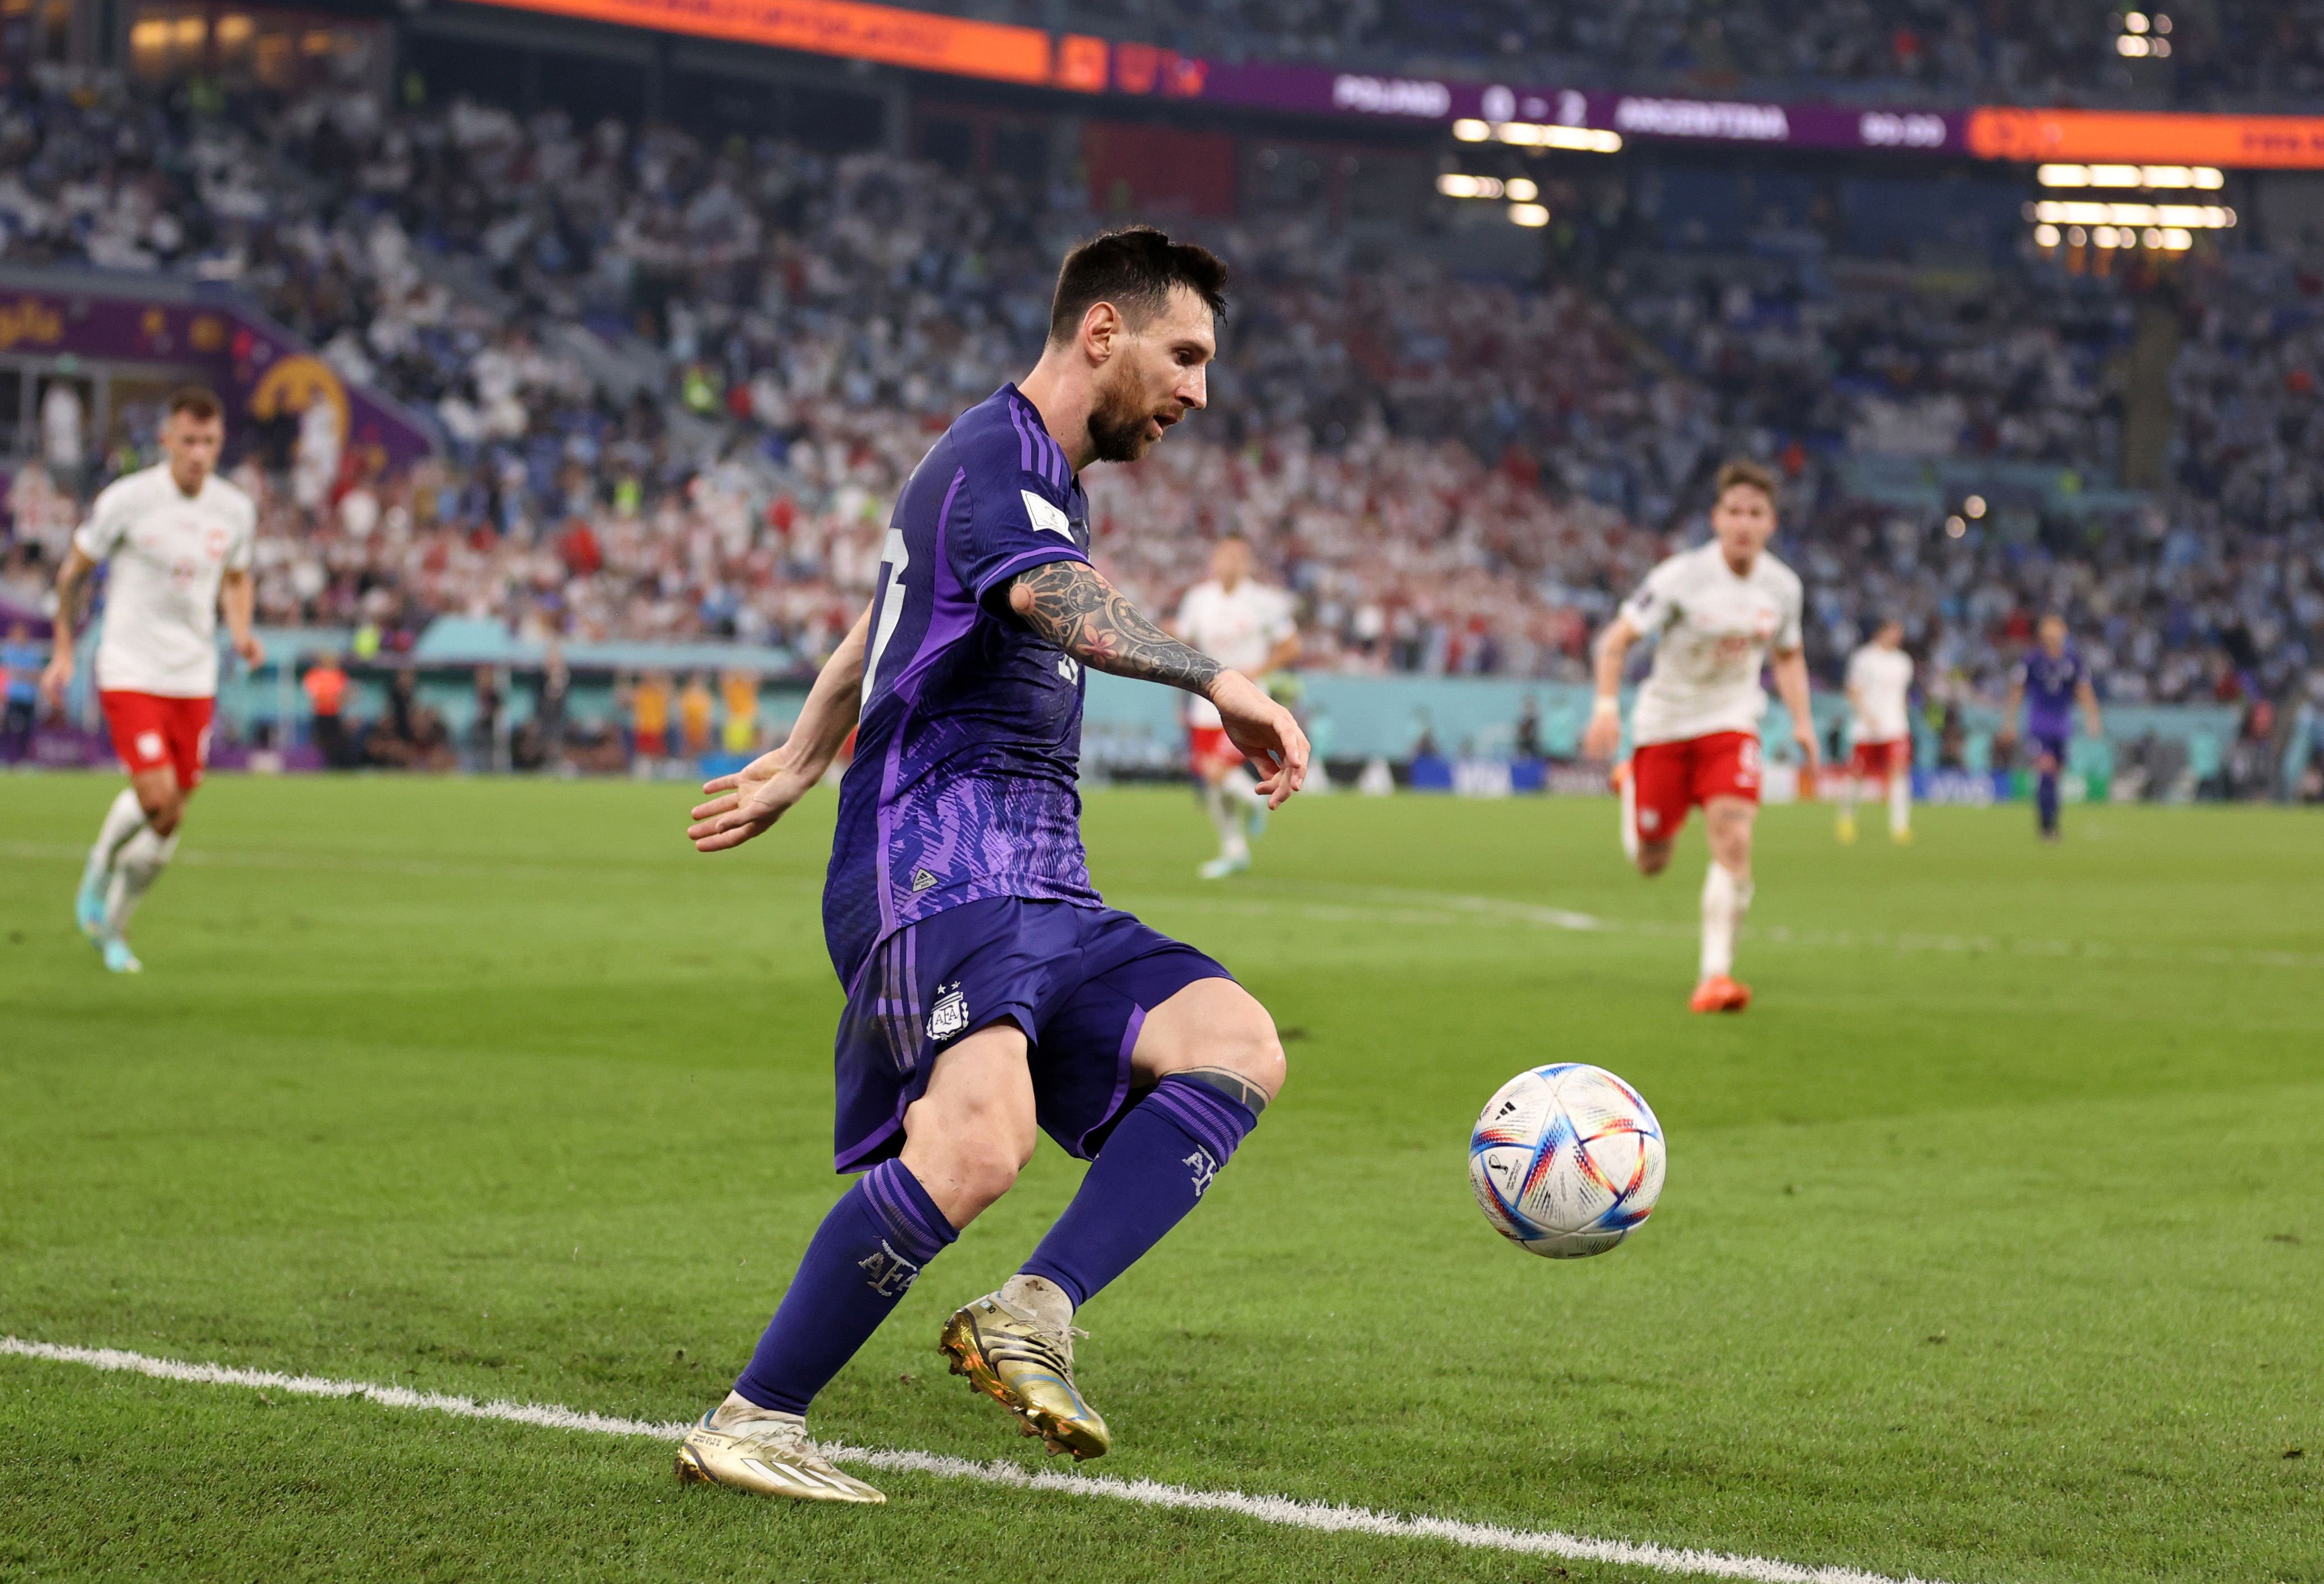 Lionel Messi of Argentina during the FIFA World Cup Qatar 2022 Group C match between Poland and Argentina at Stadium 974 on November 30, 2022 in Doha, Qatar